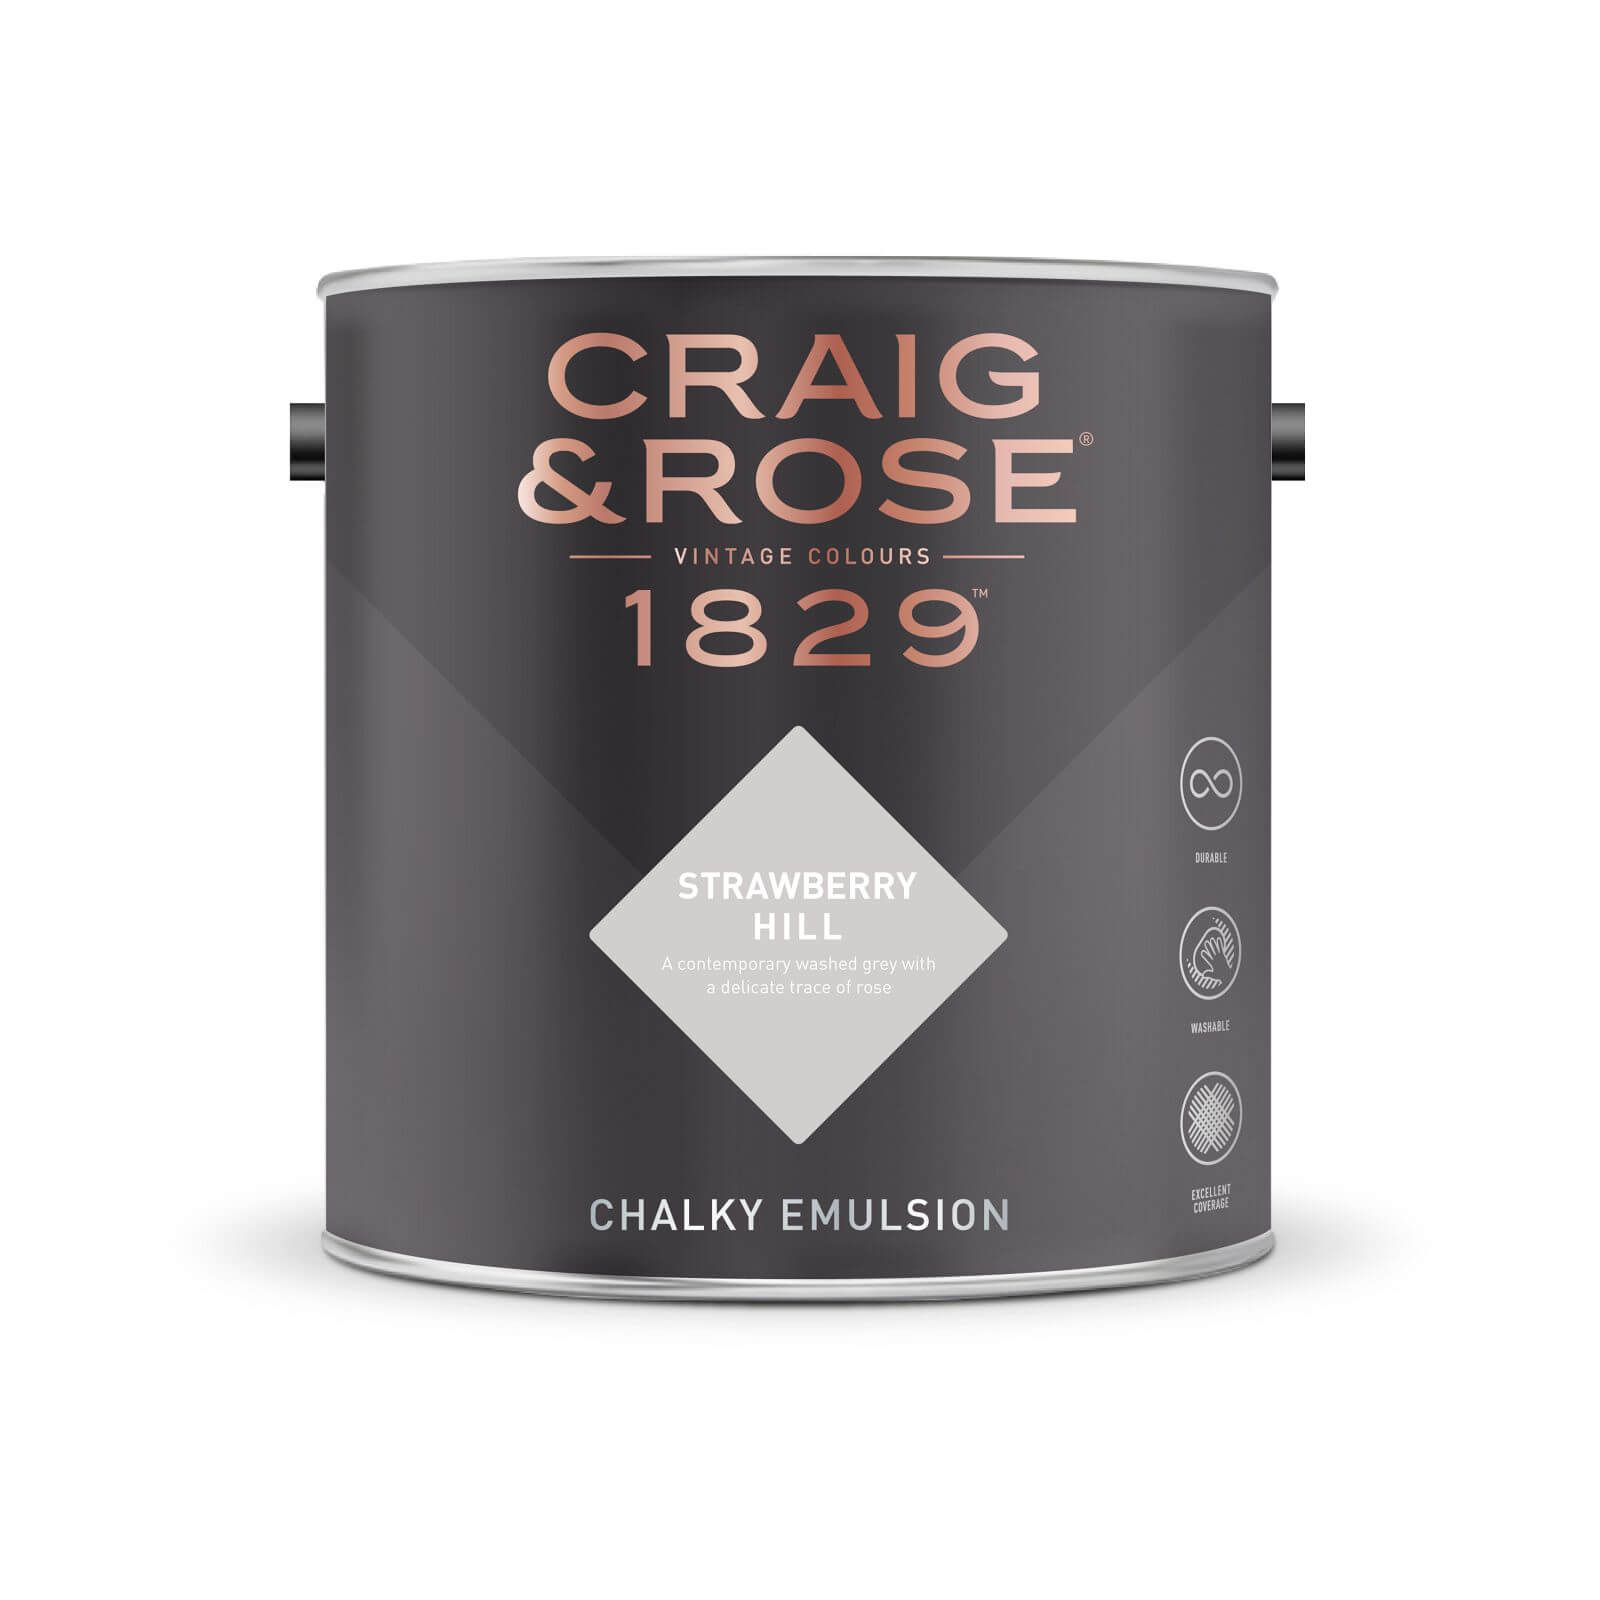 Craig & Rose 1829 Chalky Emulsion Paint Strawberry Hill - Tester 50ml